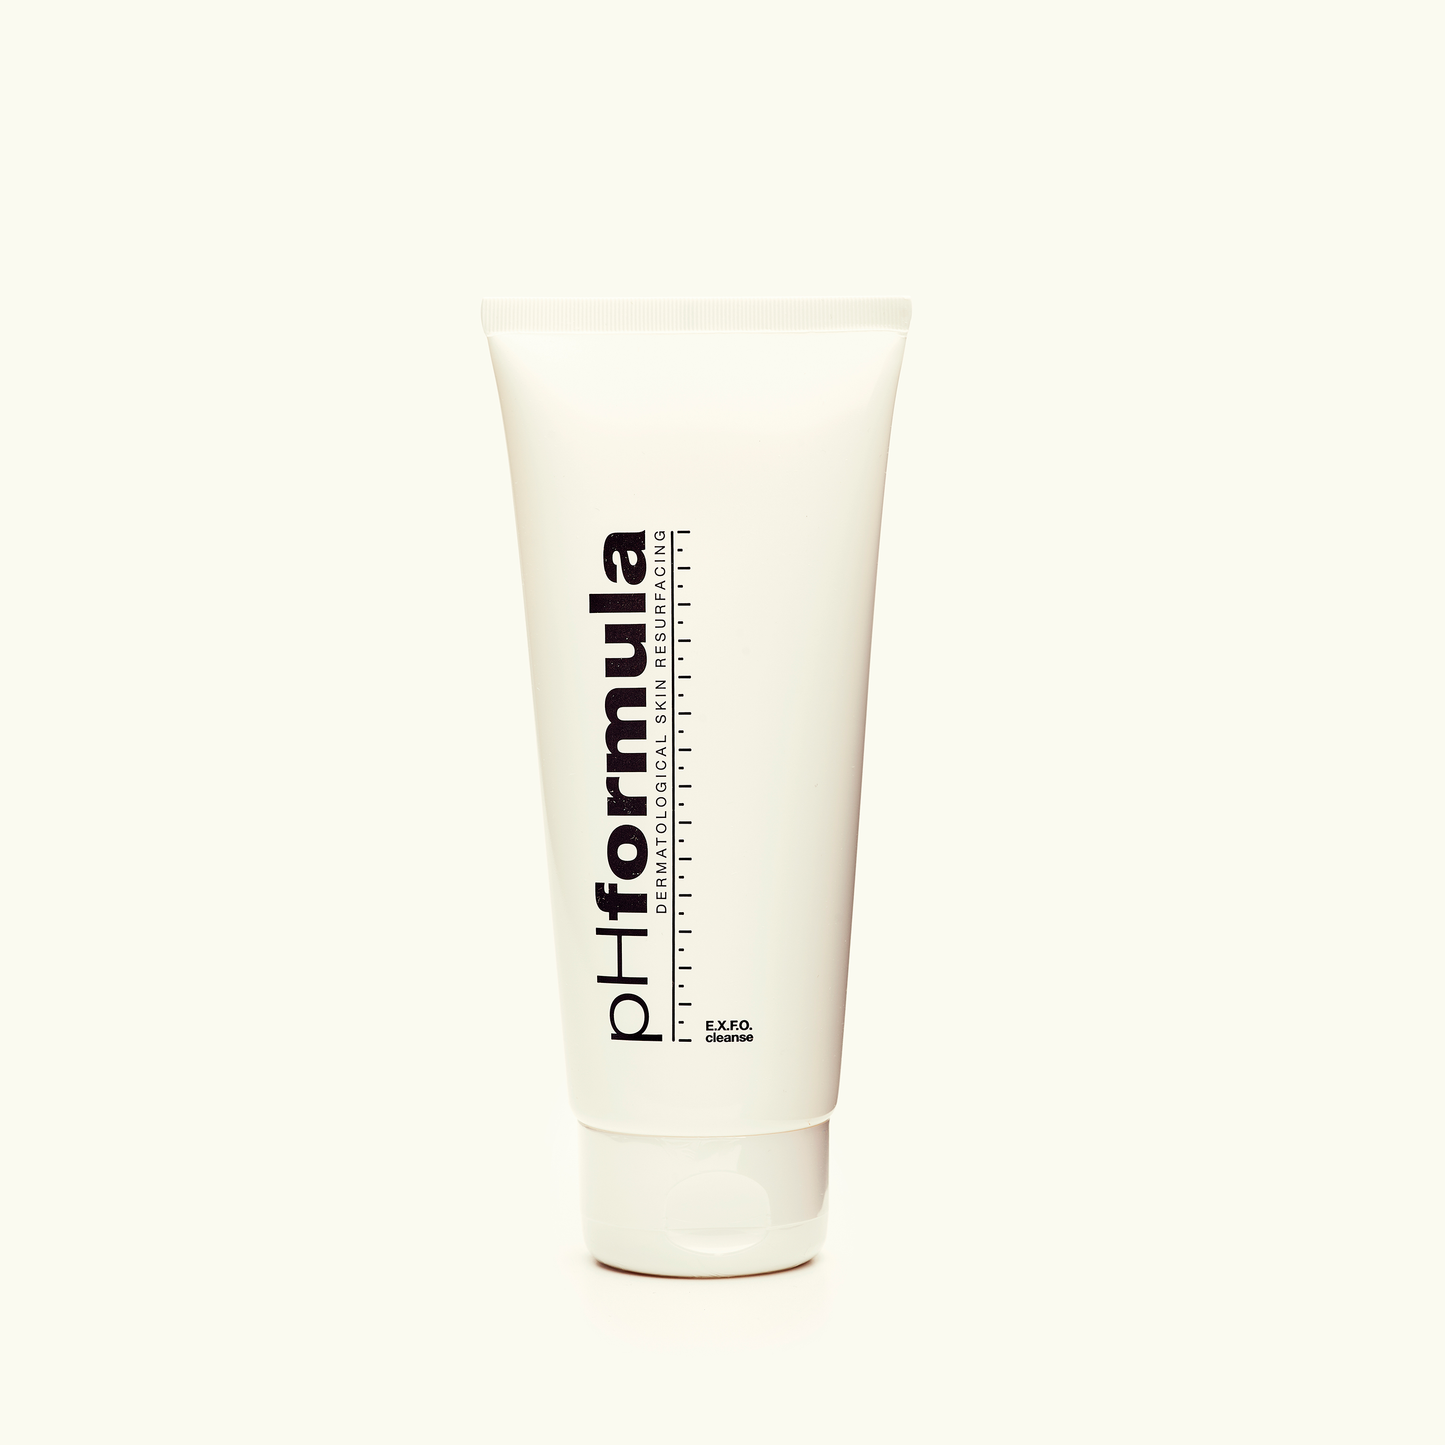 Facial cleansing from PH Formula 200ml